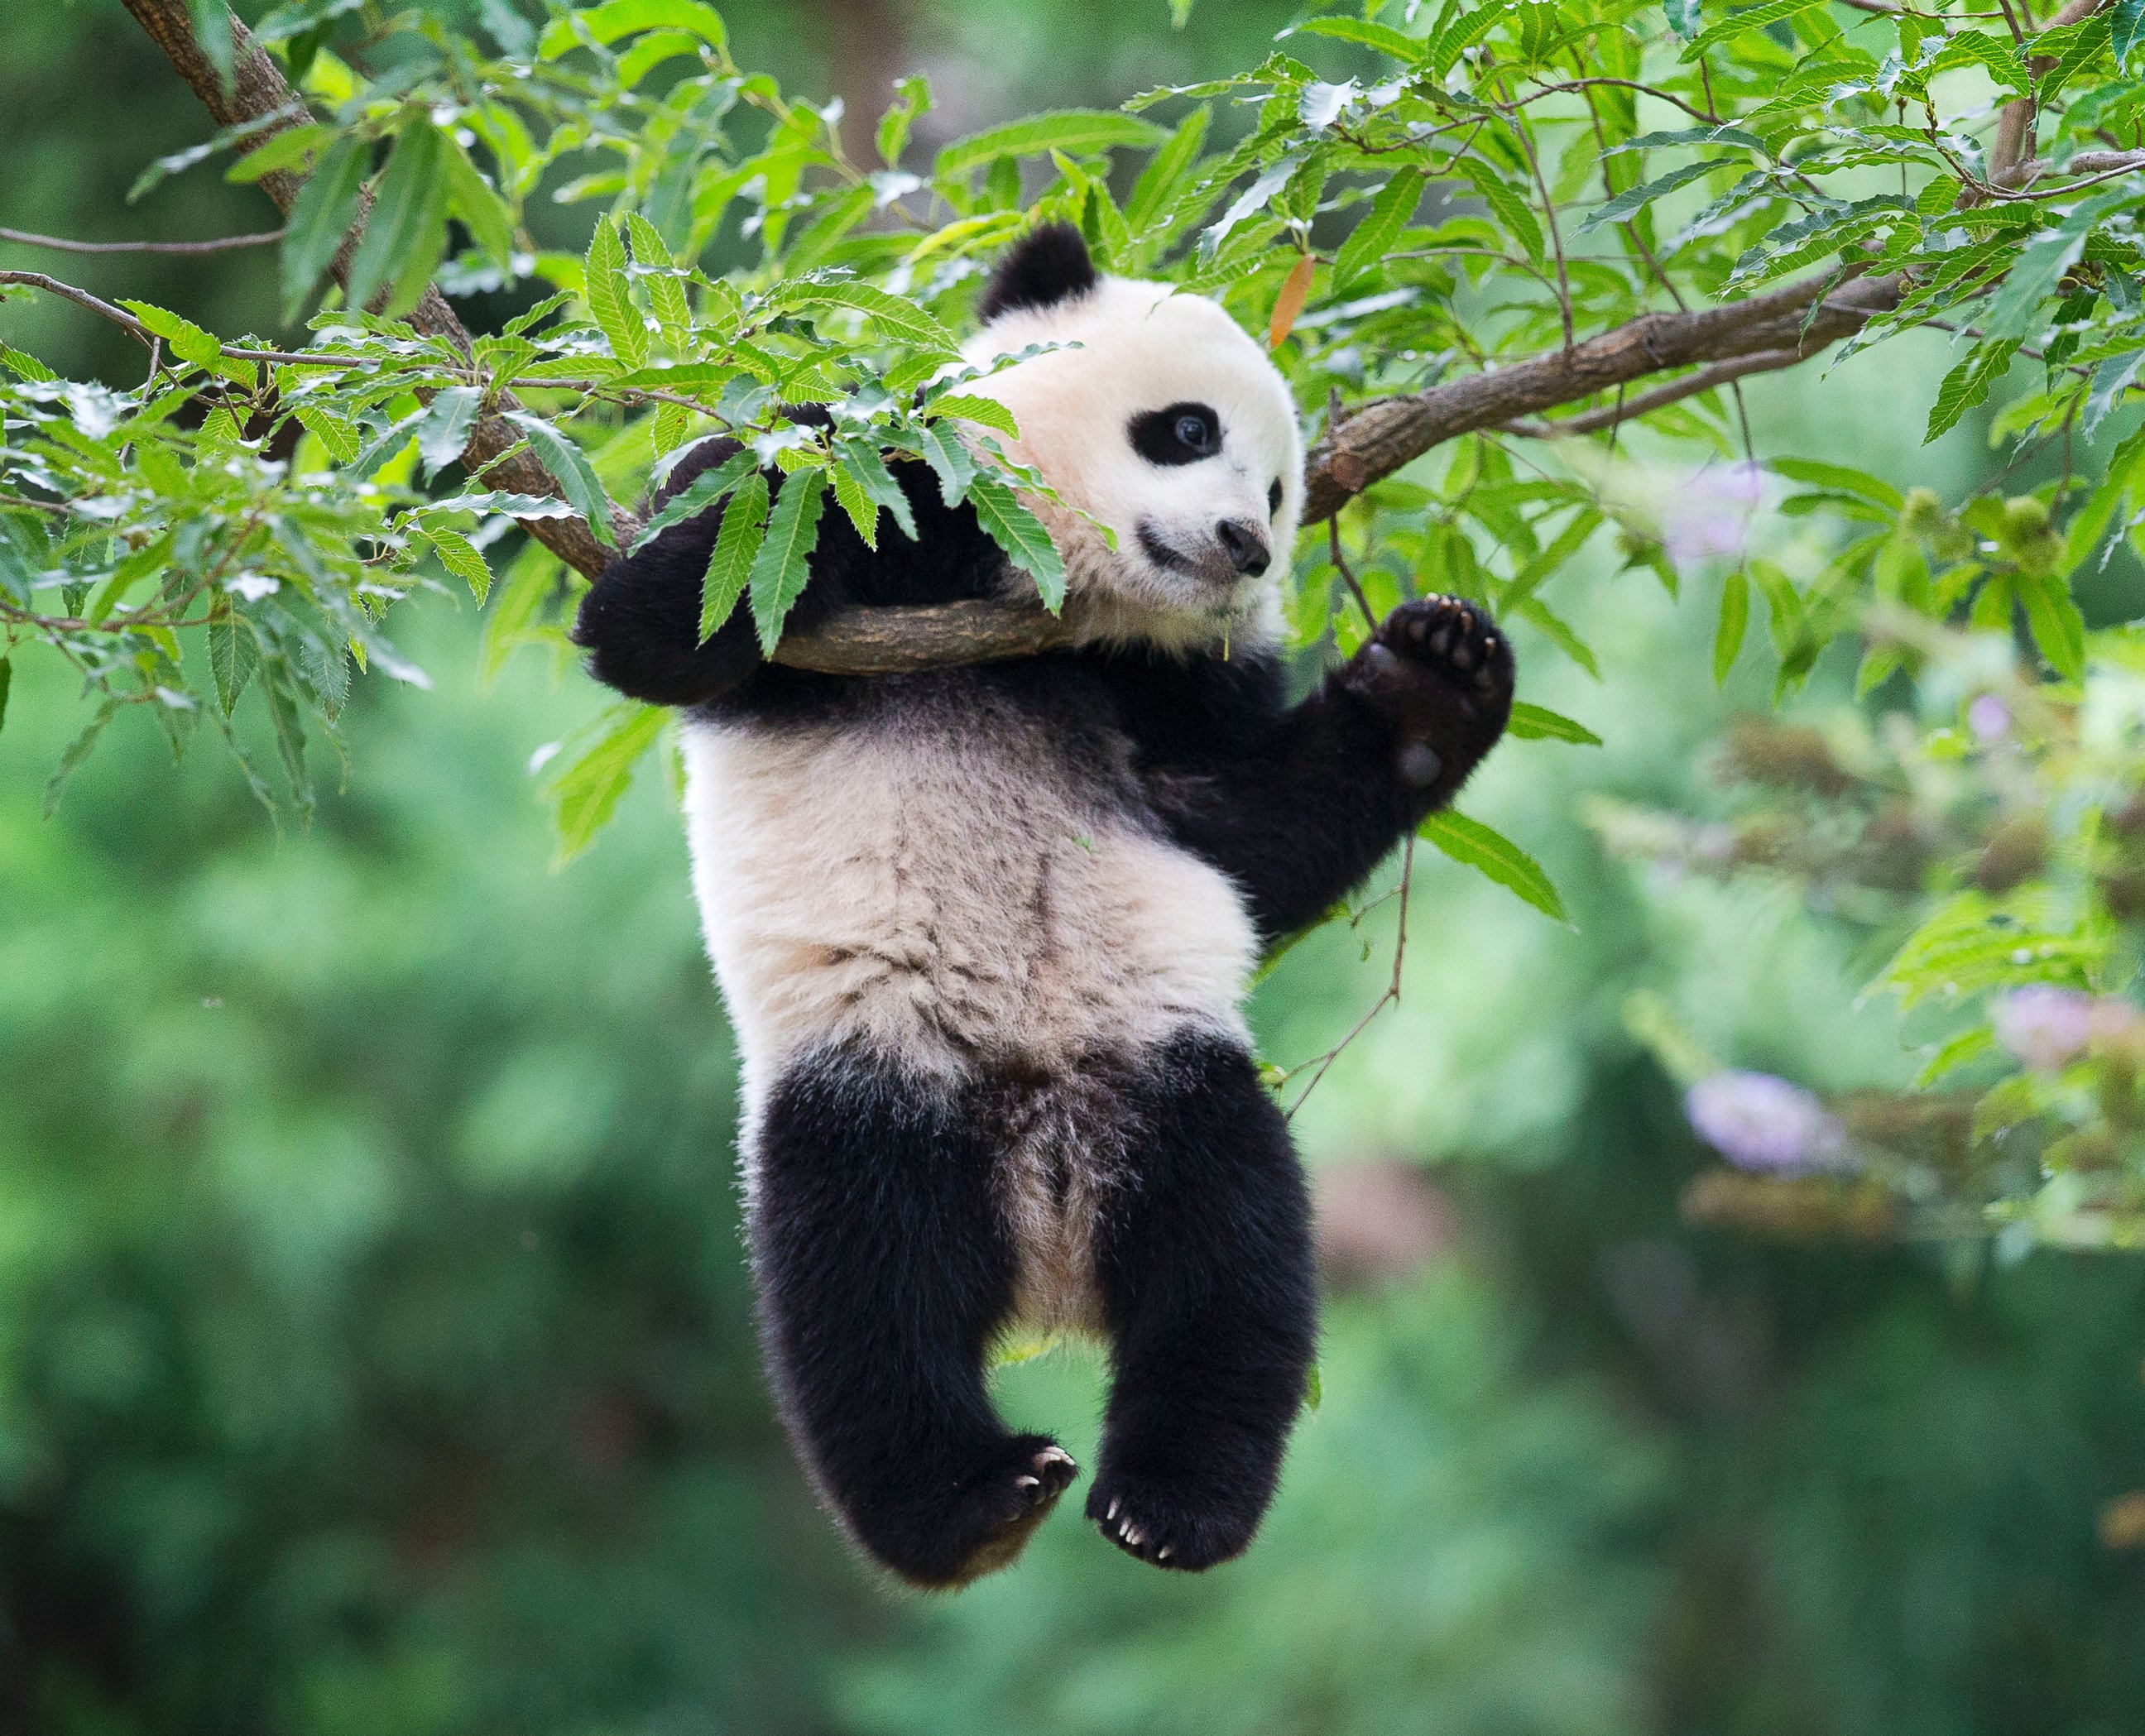 PHOTO: Panda cub Bao Bao hangs from a tree in her habitat at the National Zoo in Washington on her first birthday, Aug. 23, 2014. 